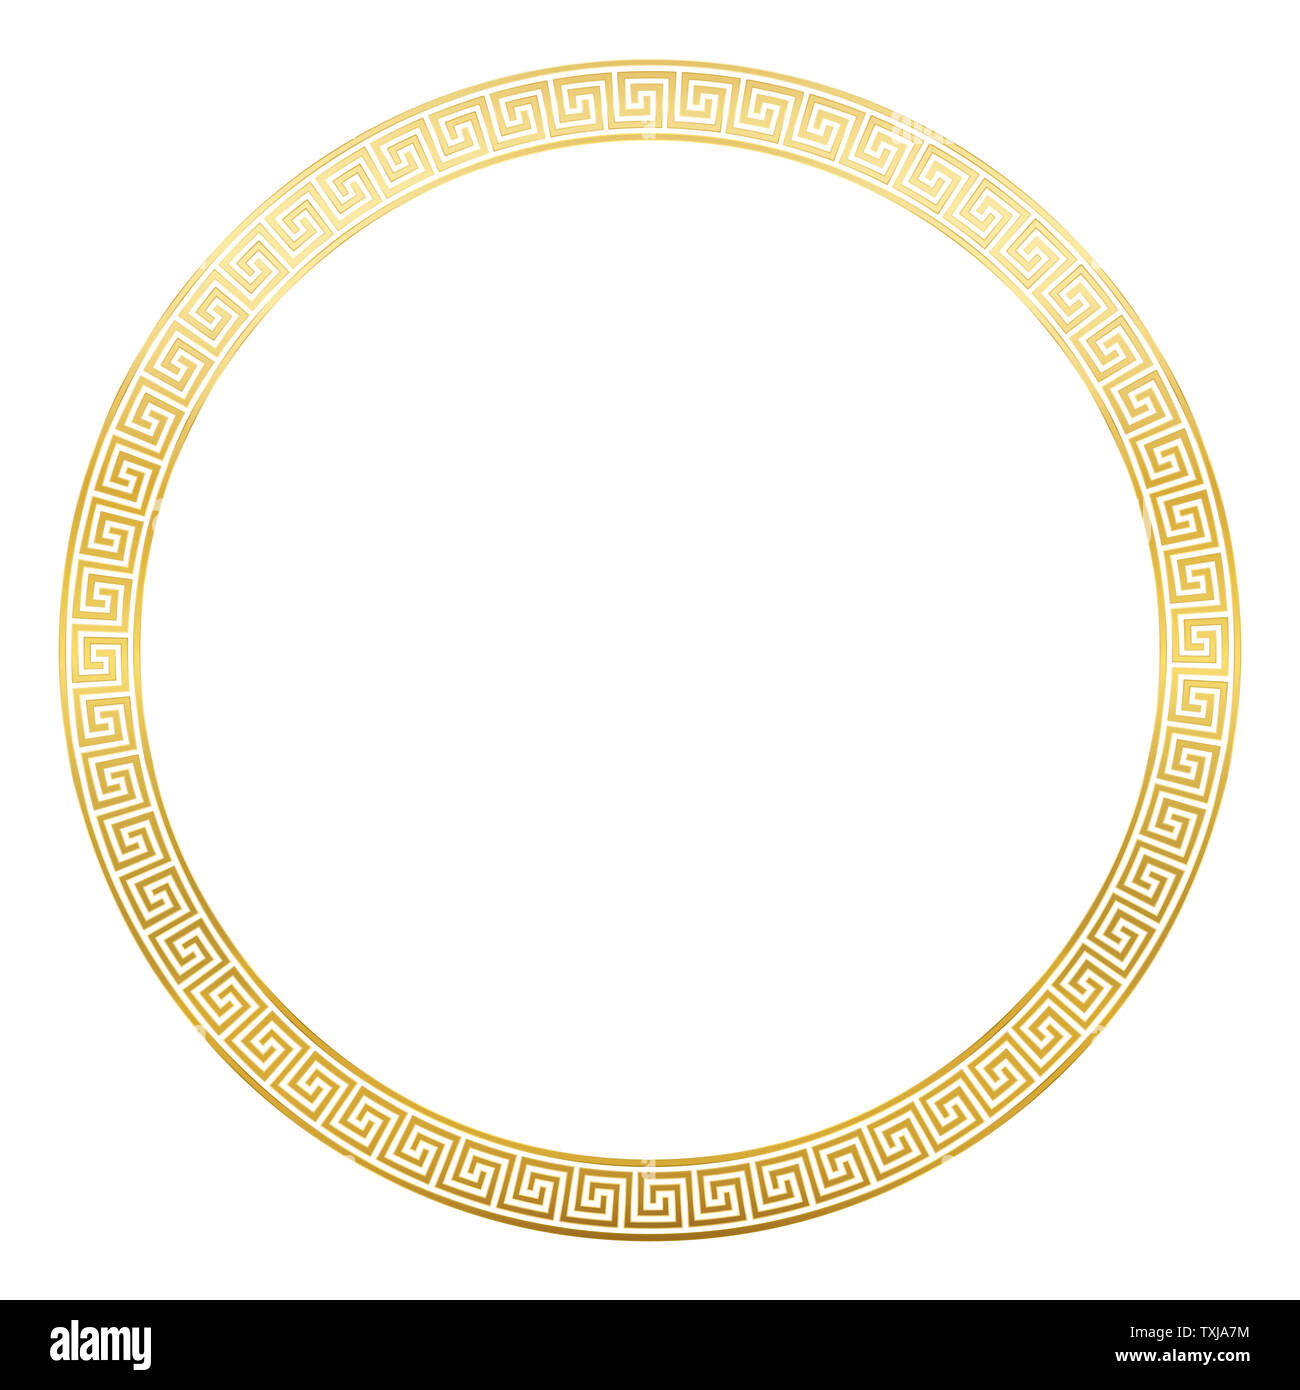 Ancient pattern frame, round golden meander design with seamless greek pattern,  decorative border, constructed from continuous lines. Stock Photo